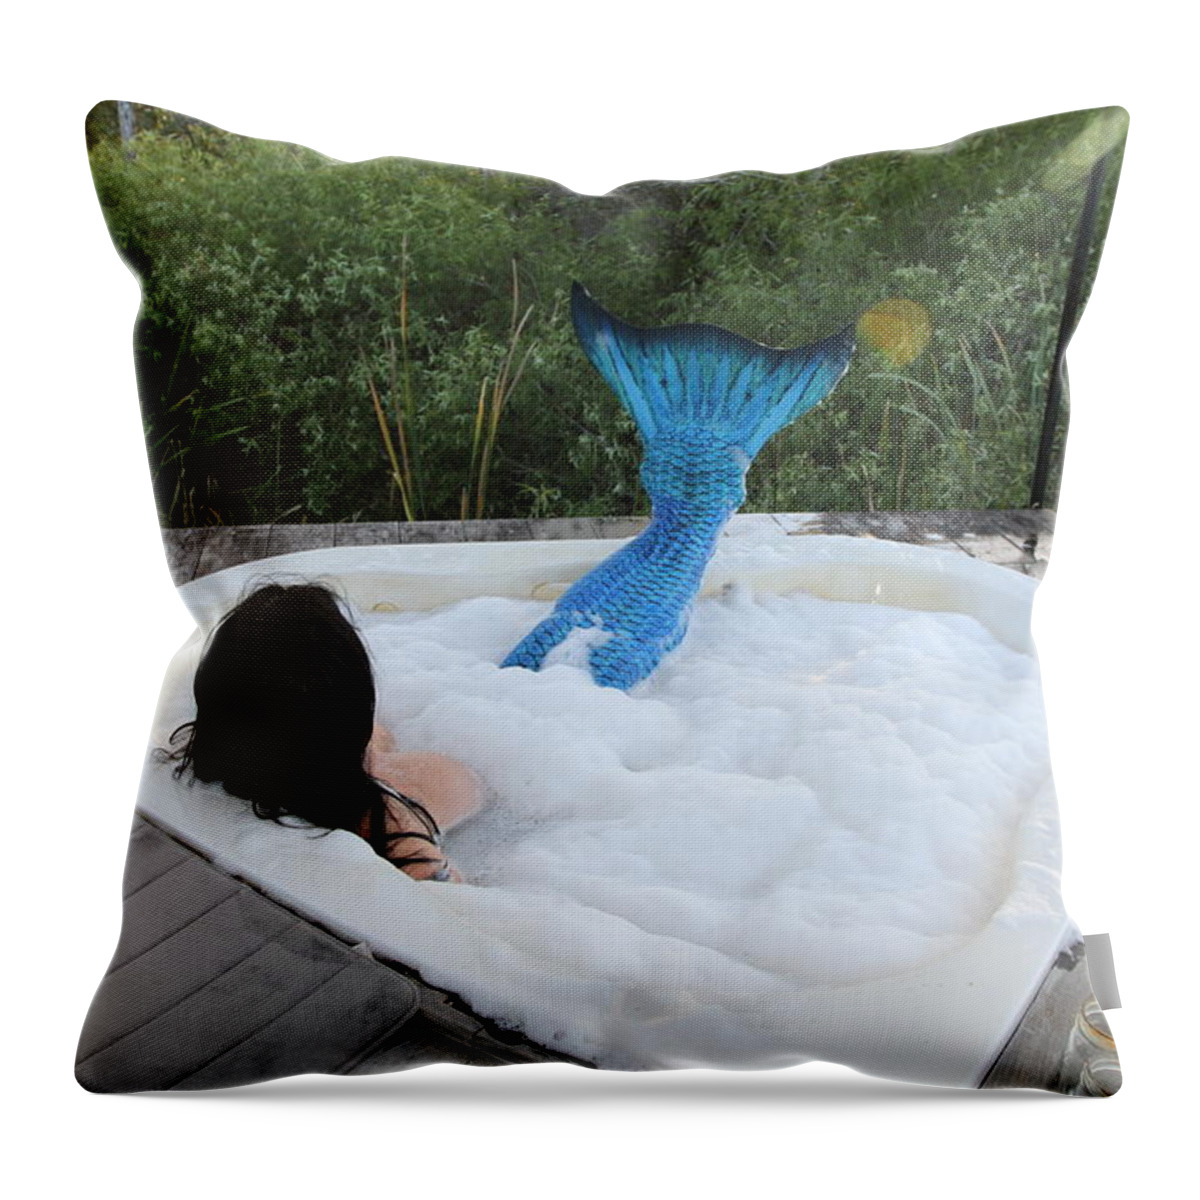 Everglades City Mermaid Throw Pillow featuring the photograph Everglades City Florida Mermaid 018 by Lucky Cole